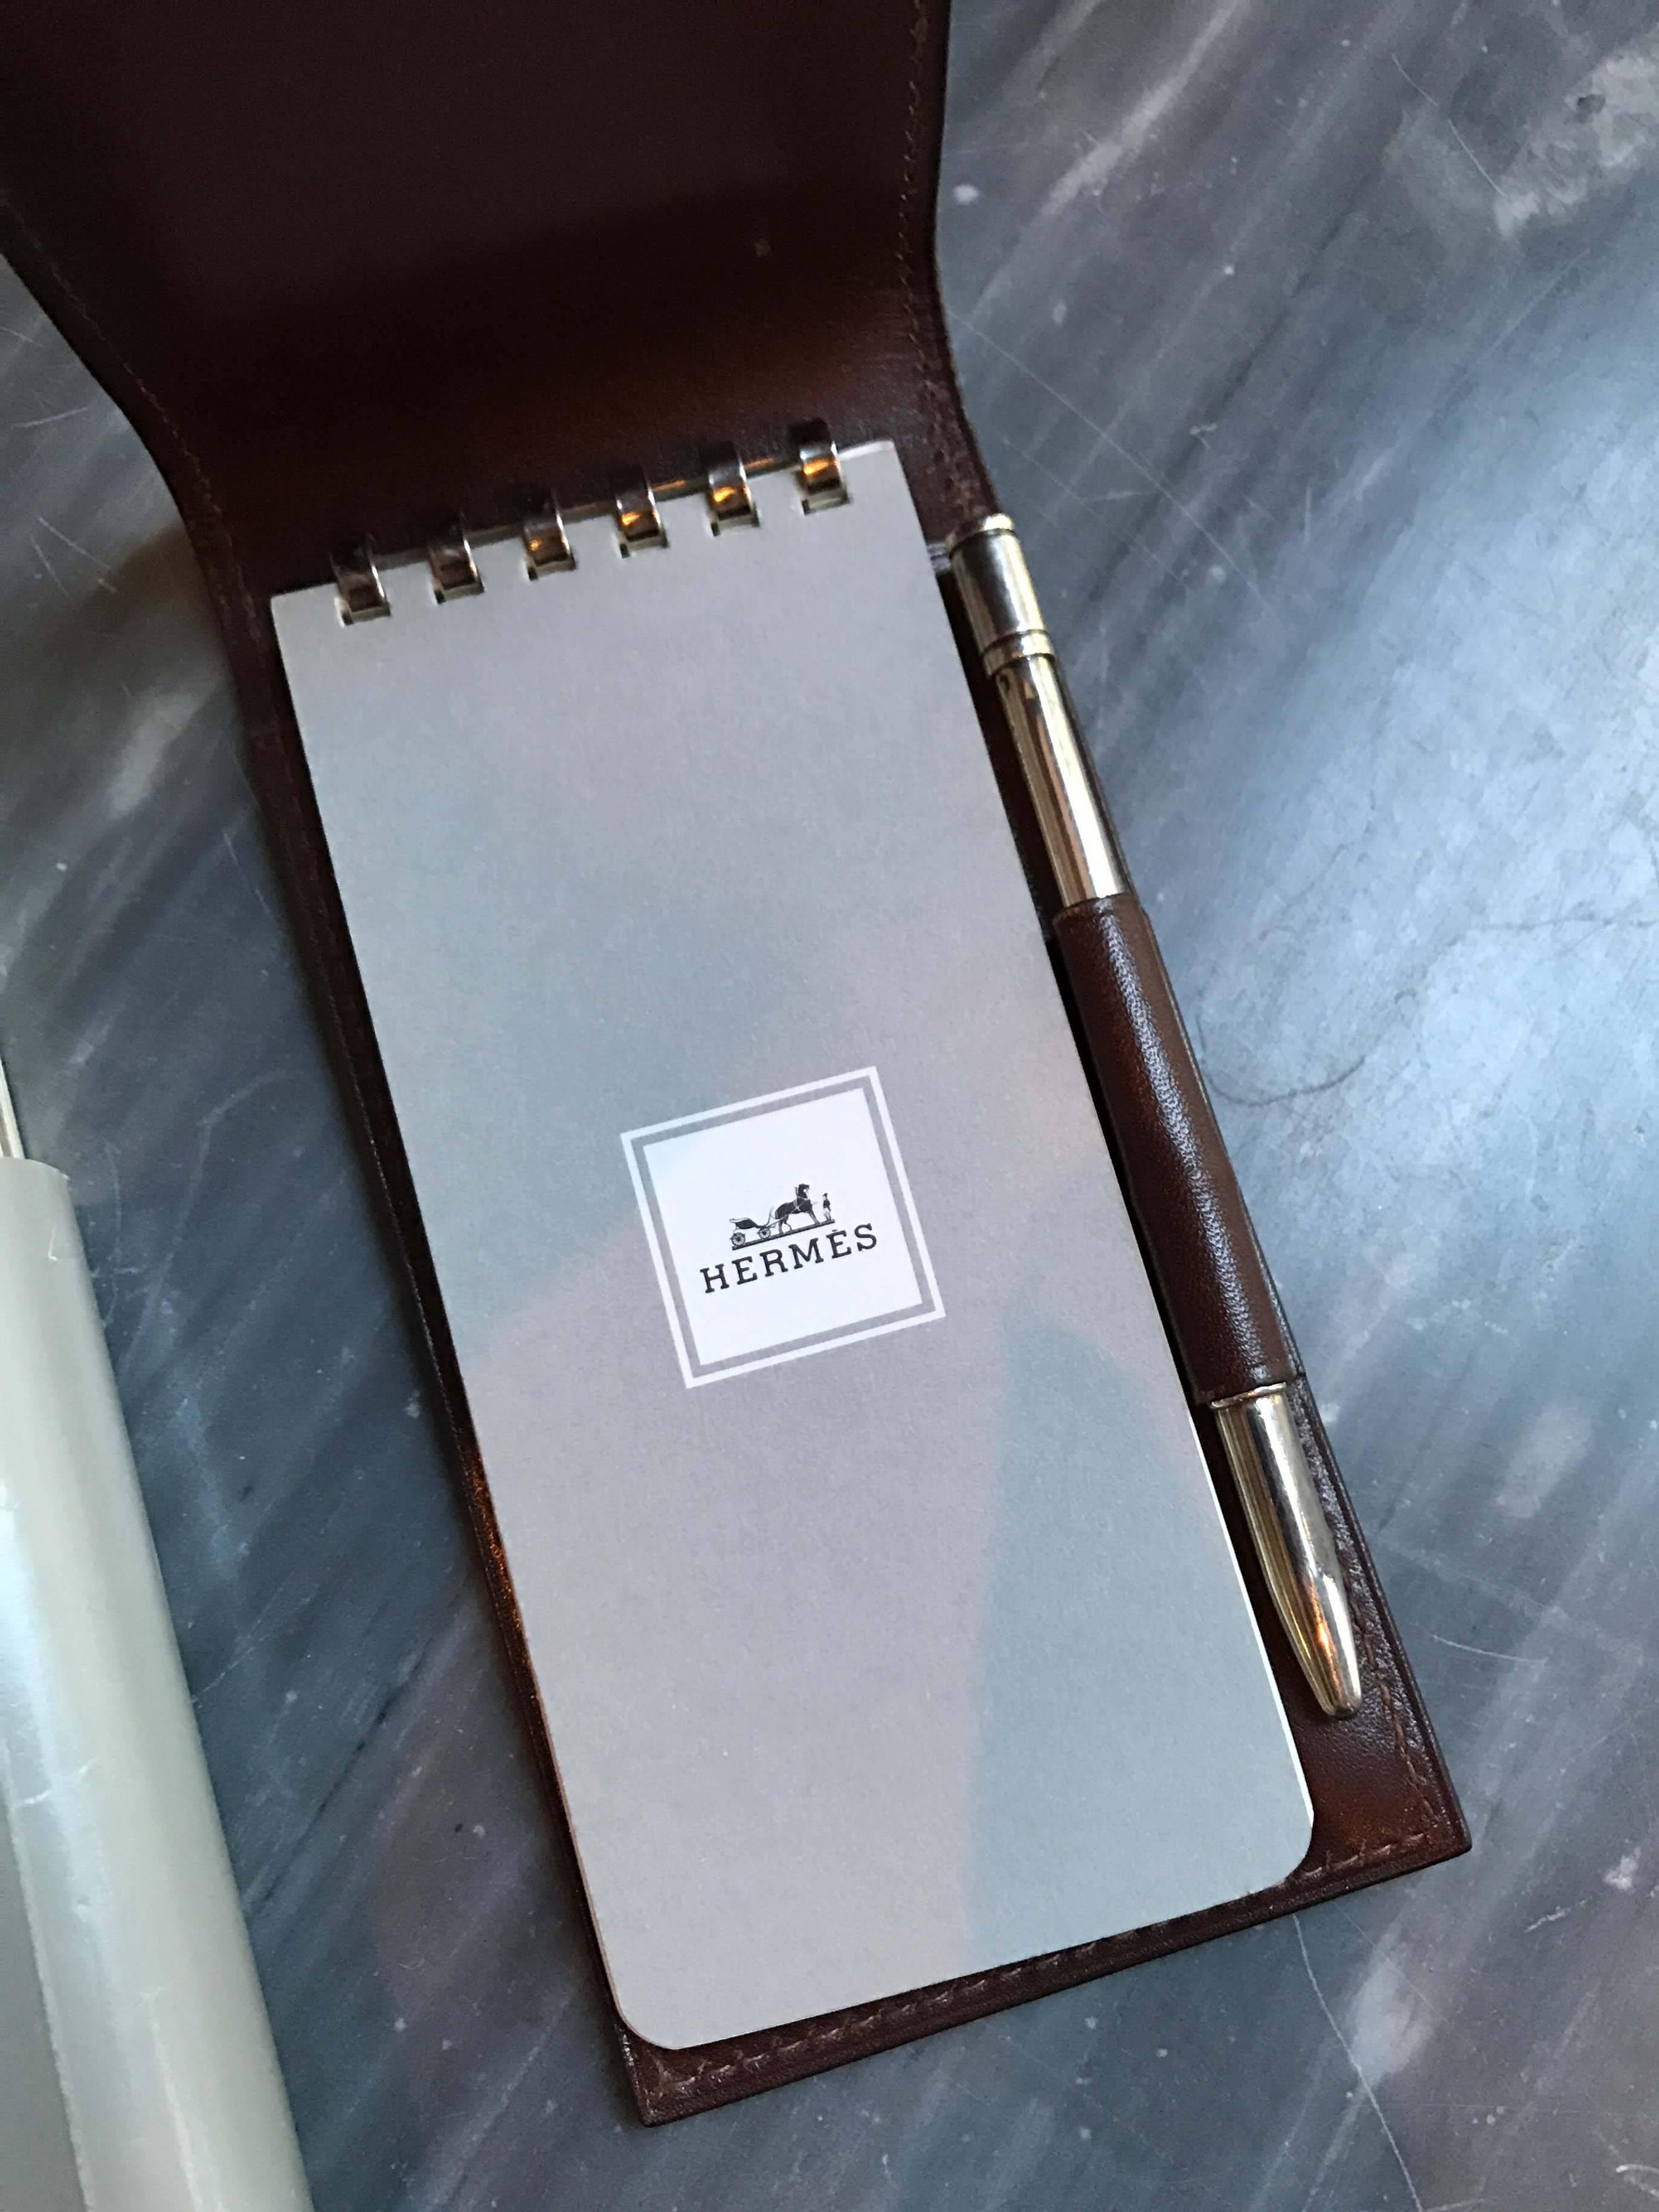 Leather note pad and pen by Hermès with four refills. Good condition with minor wear consistent with light use.
 